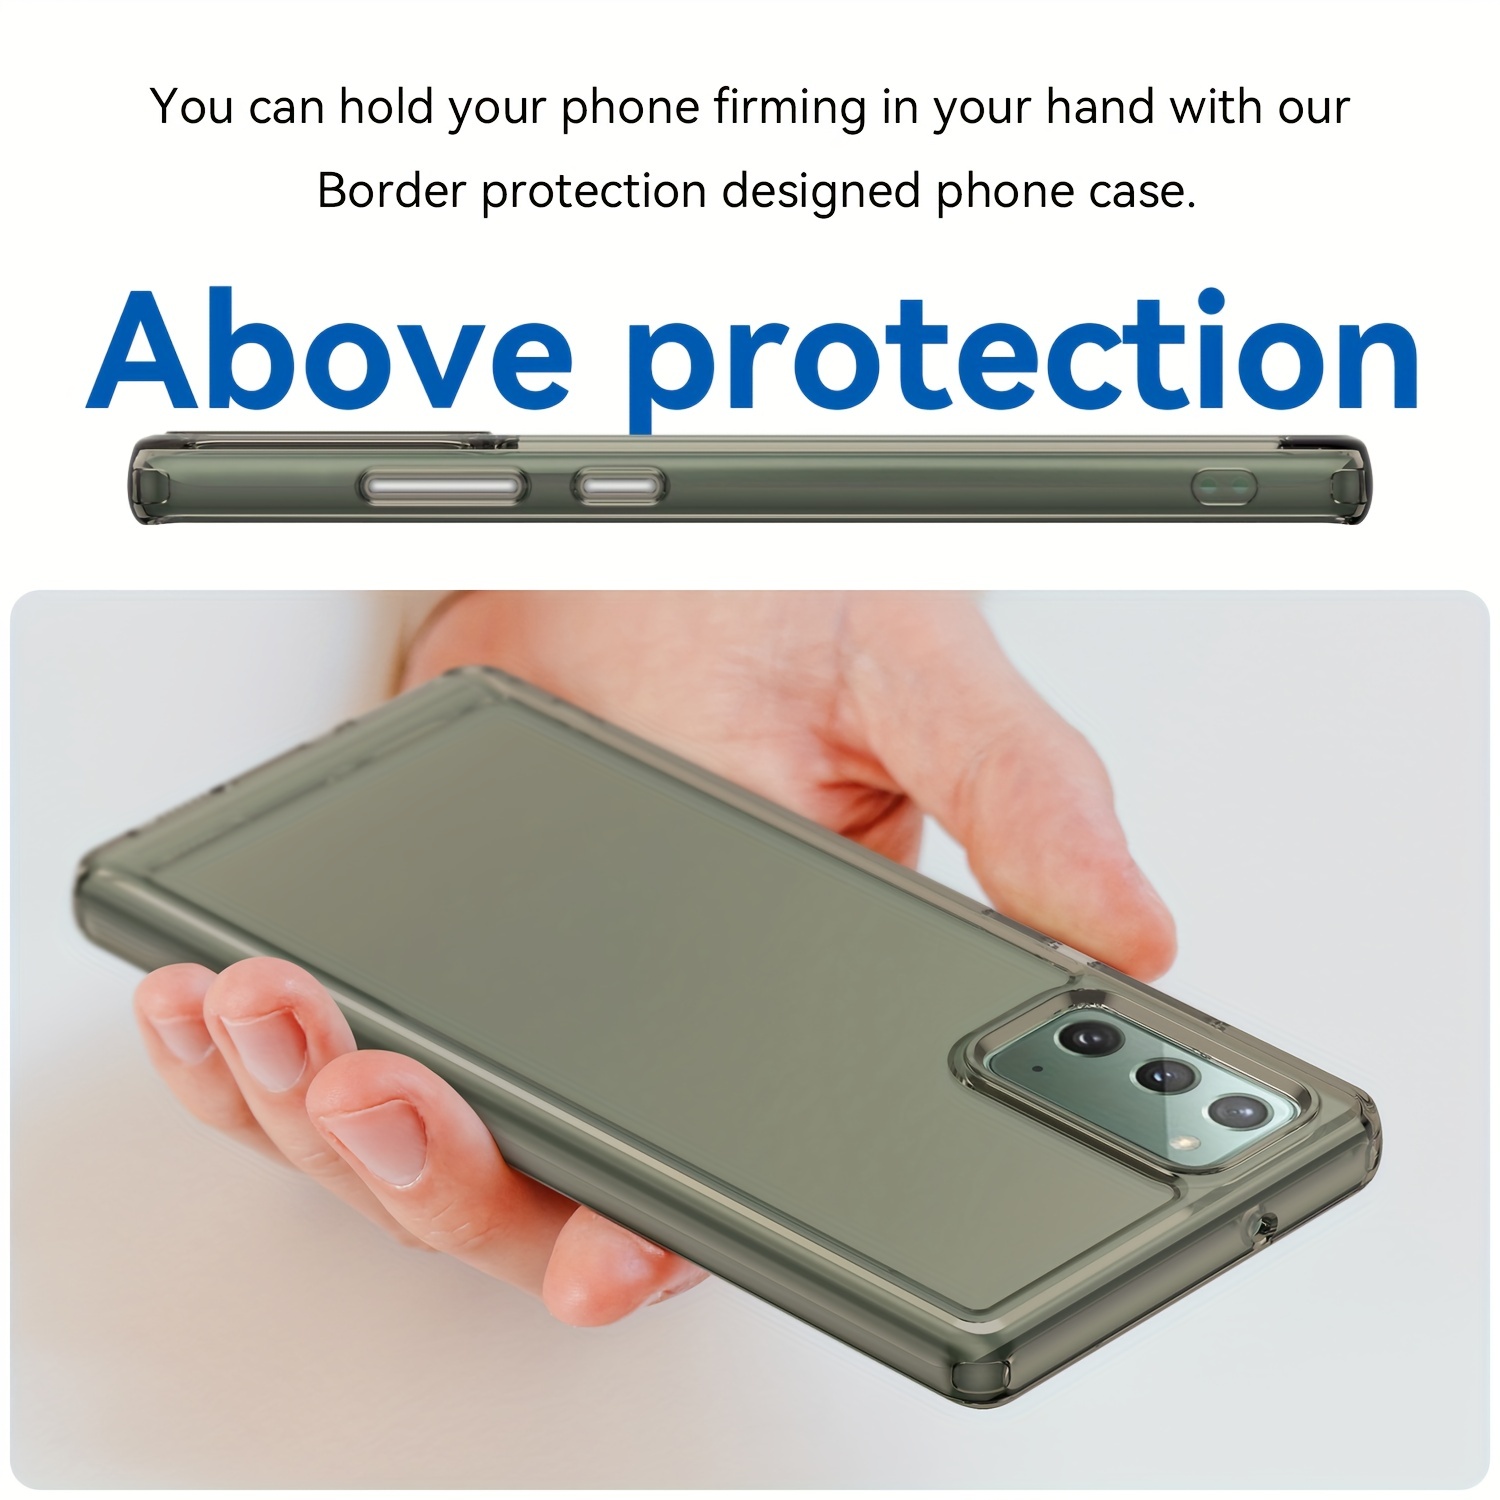 Samsung Galaxy Note20 Ultra 5G Case, Clear Protective Cover